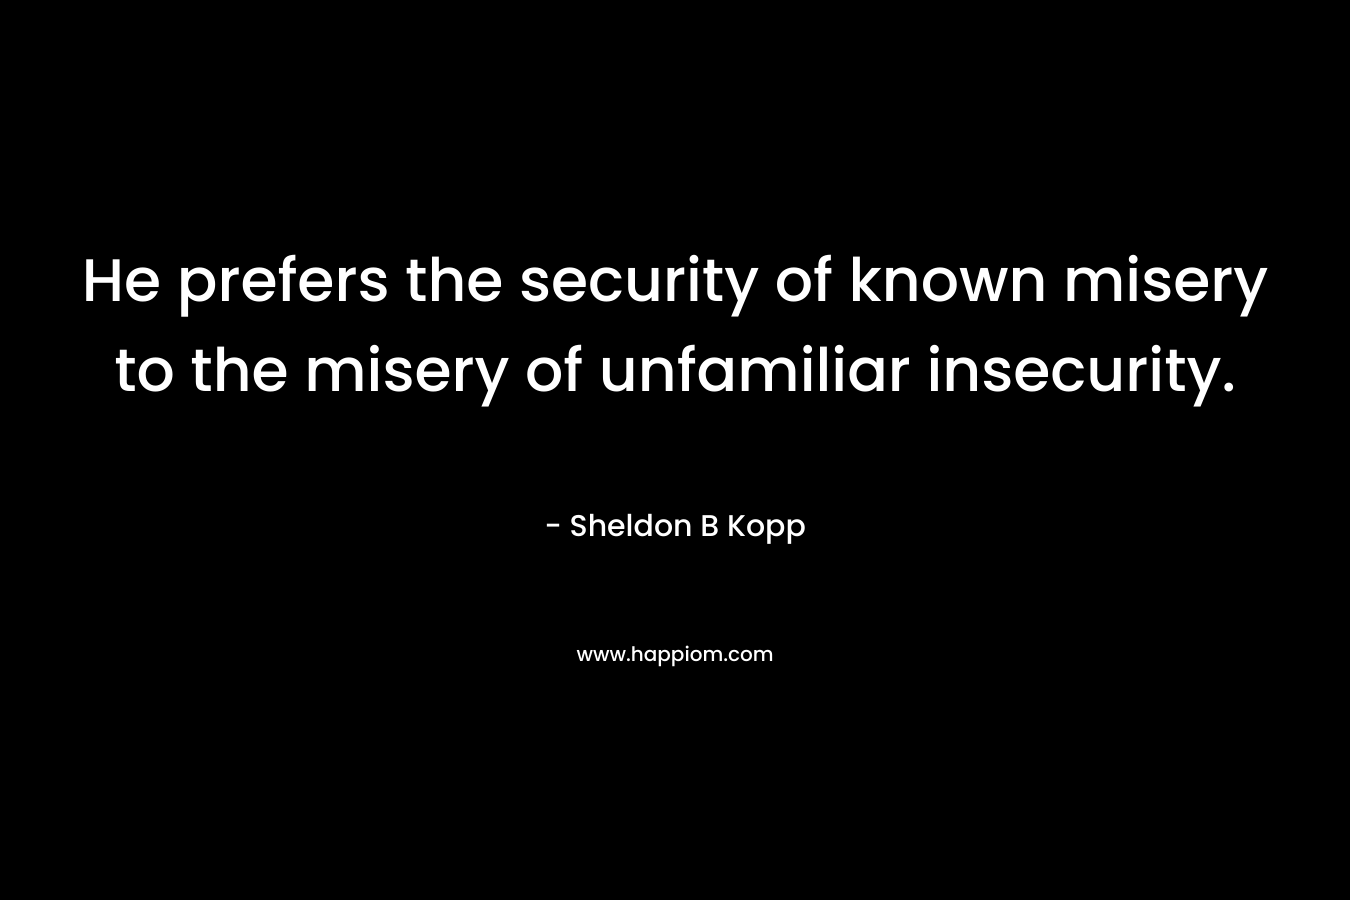 He prefers the security of known misery to the misery of unfamiliar insecurity. – Sheldon B Kopp